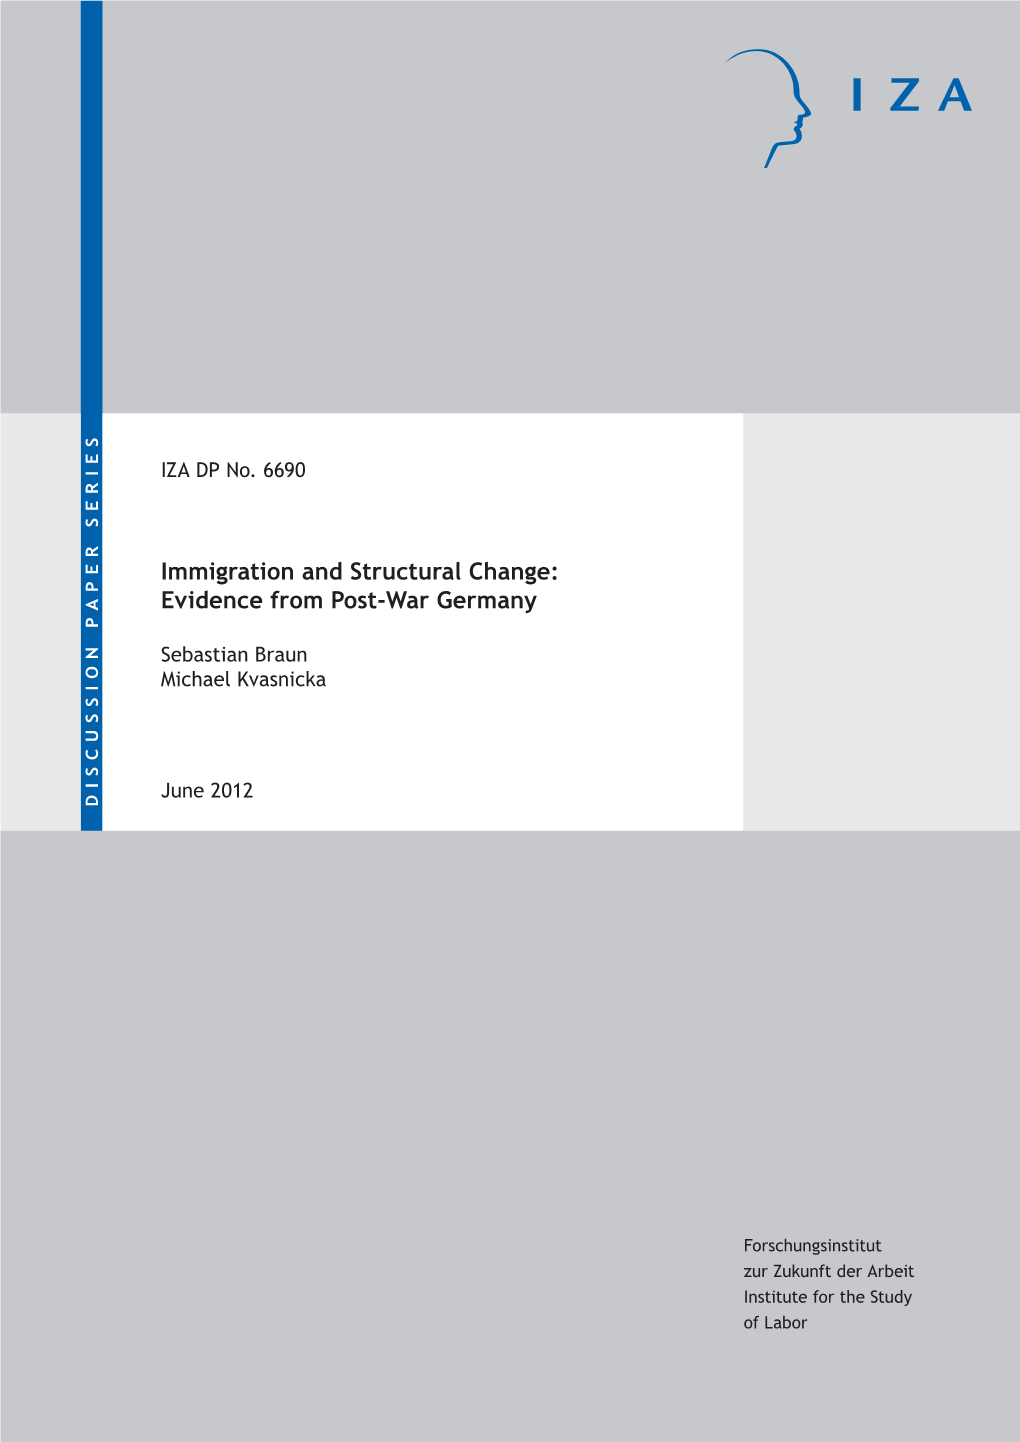 Immigration and Structural Change: Evidence from Post-War Germany